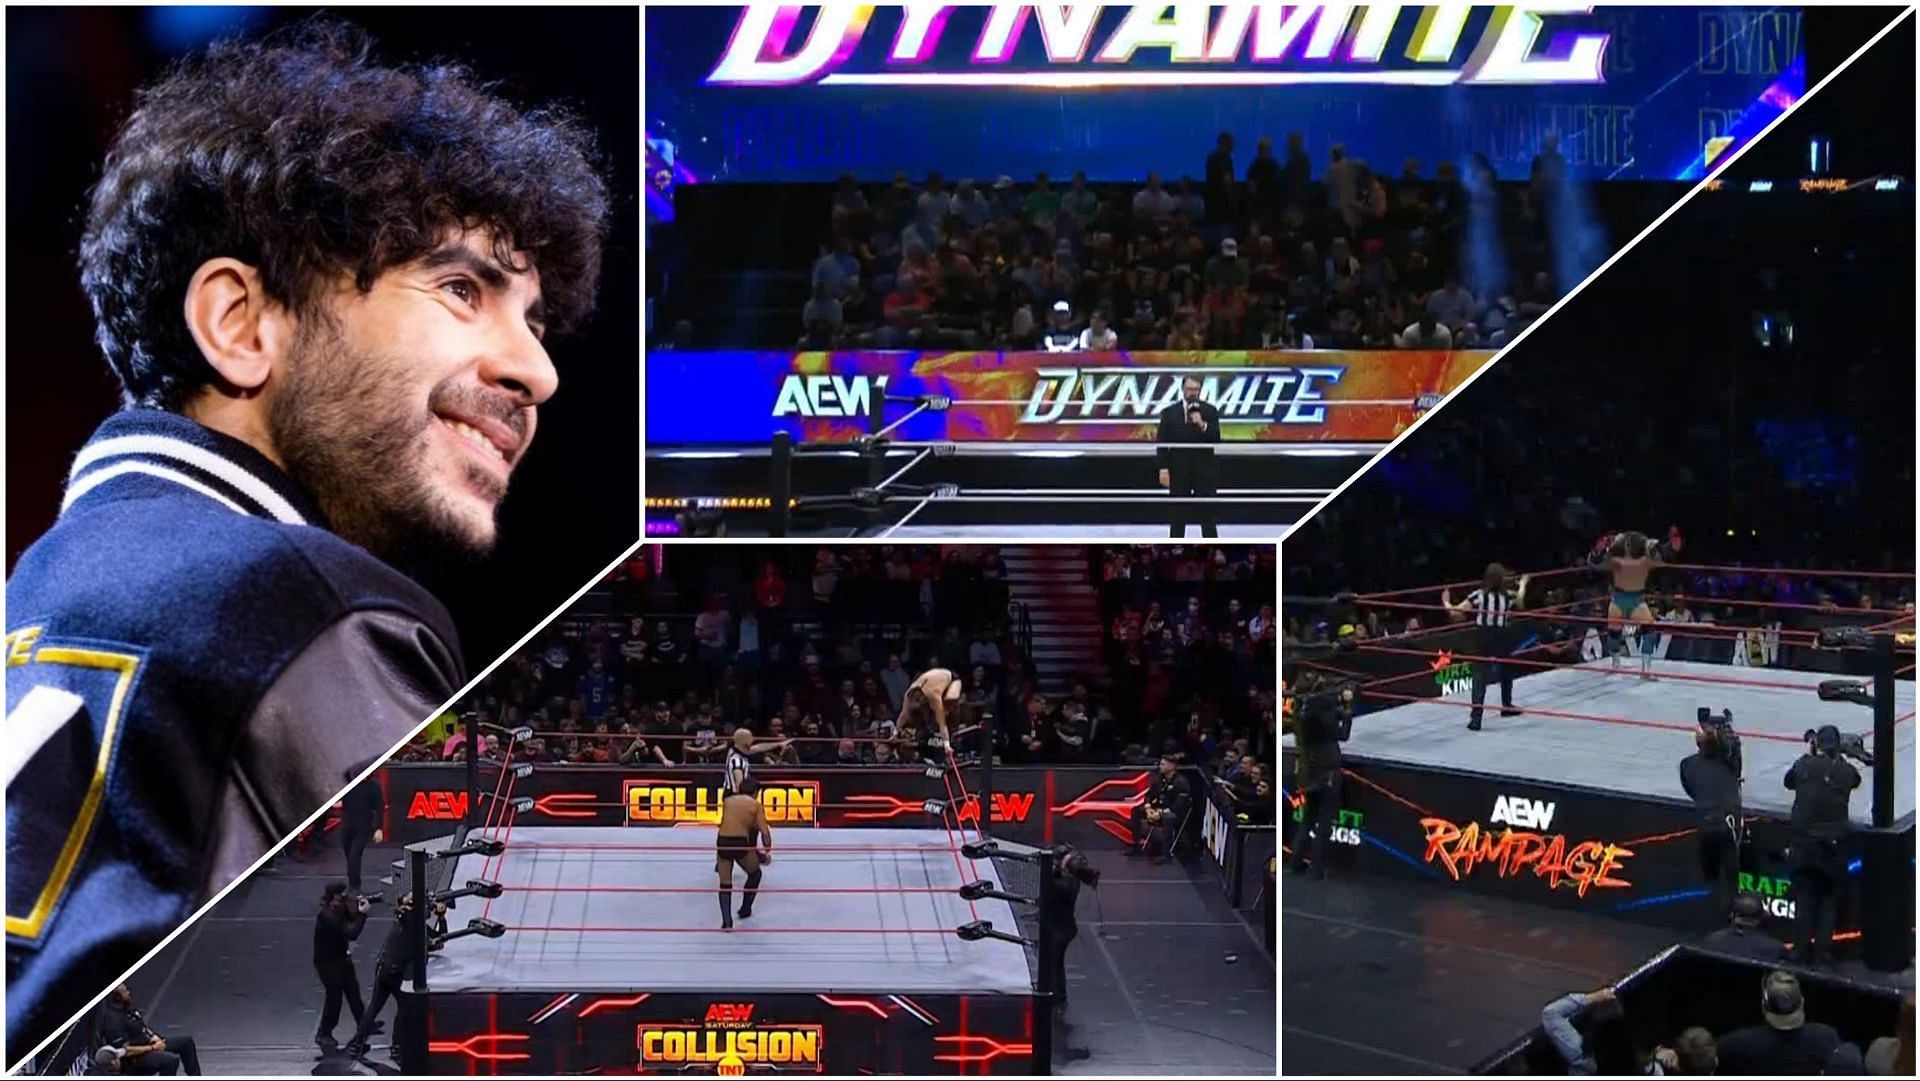 Tony Khan at AEW Dynamite, a look at the setups for Dynamite, Rampage, Collision